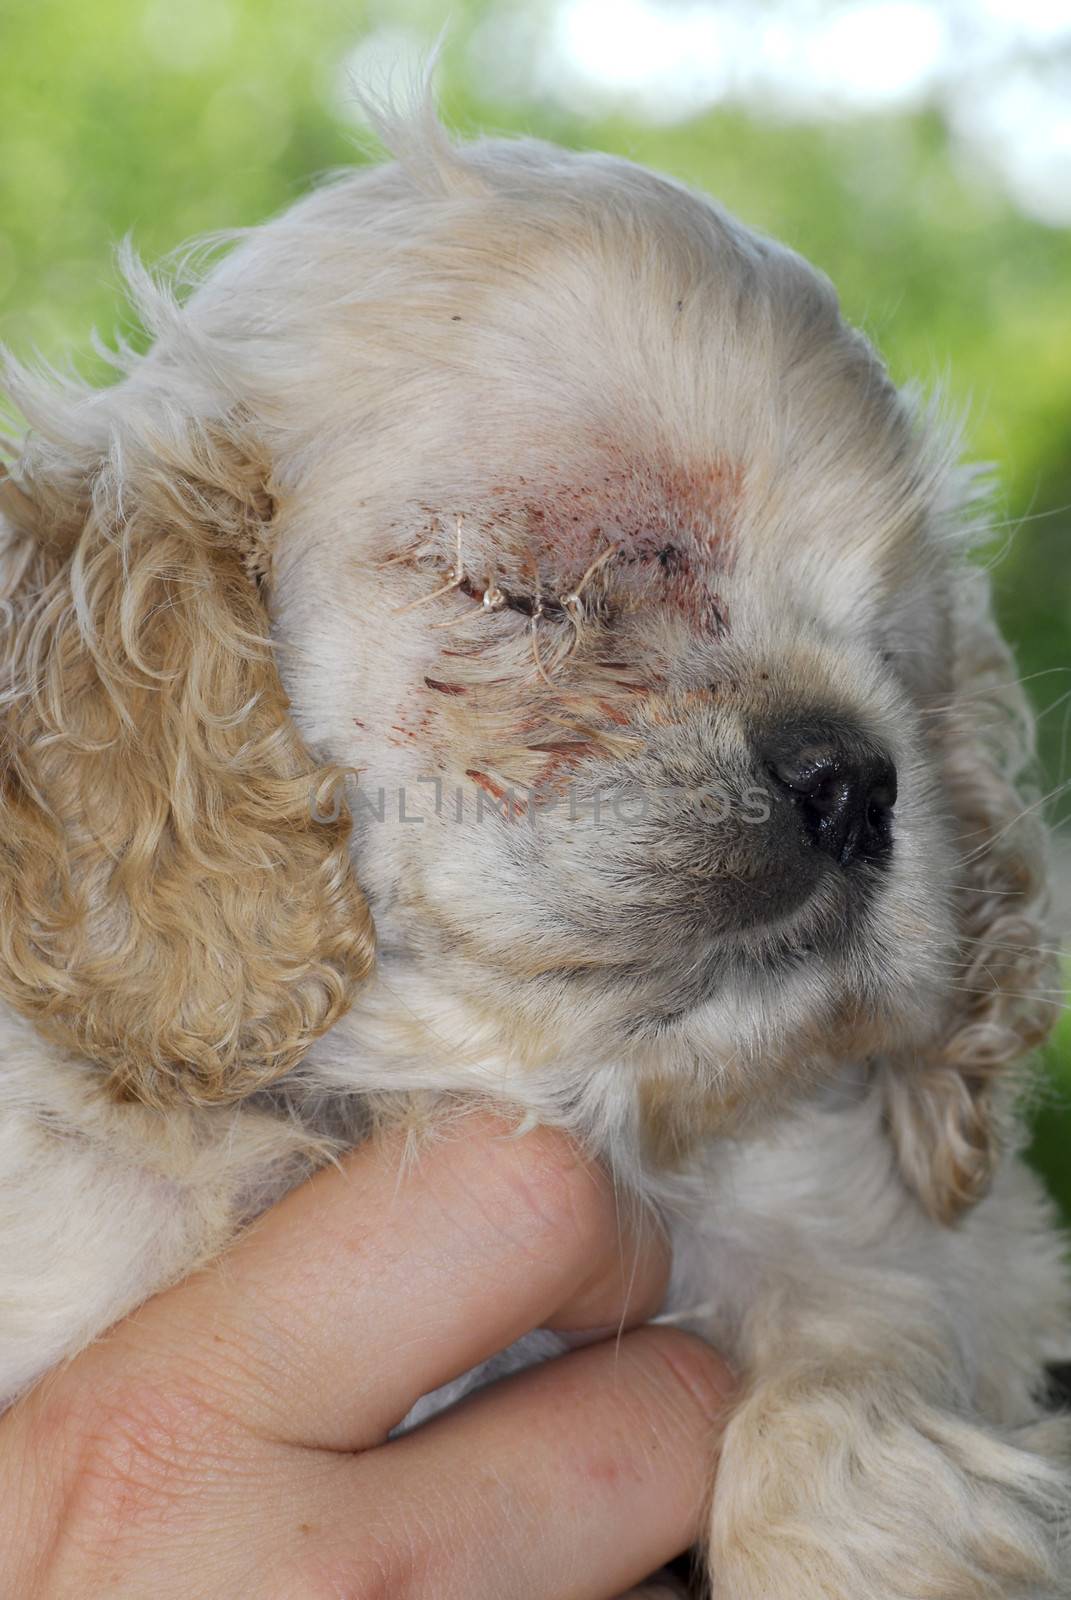 veterinary care - cocker spaniel puppy one day post-op from having eye removed - congenital glaucoma 